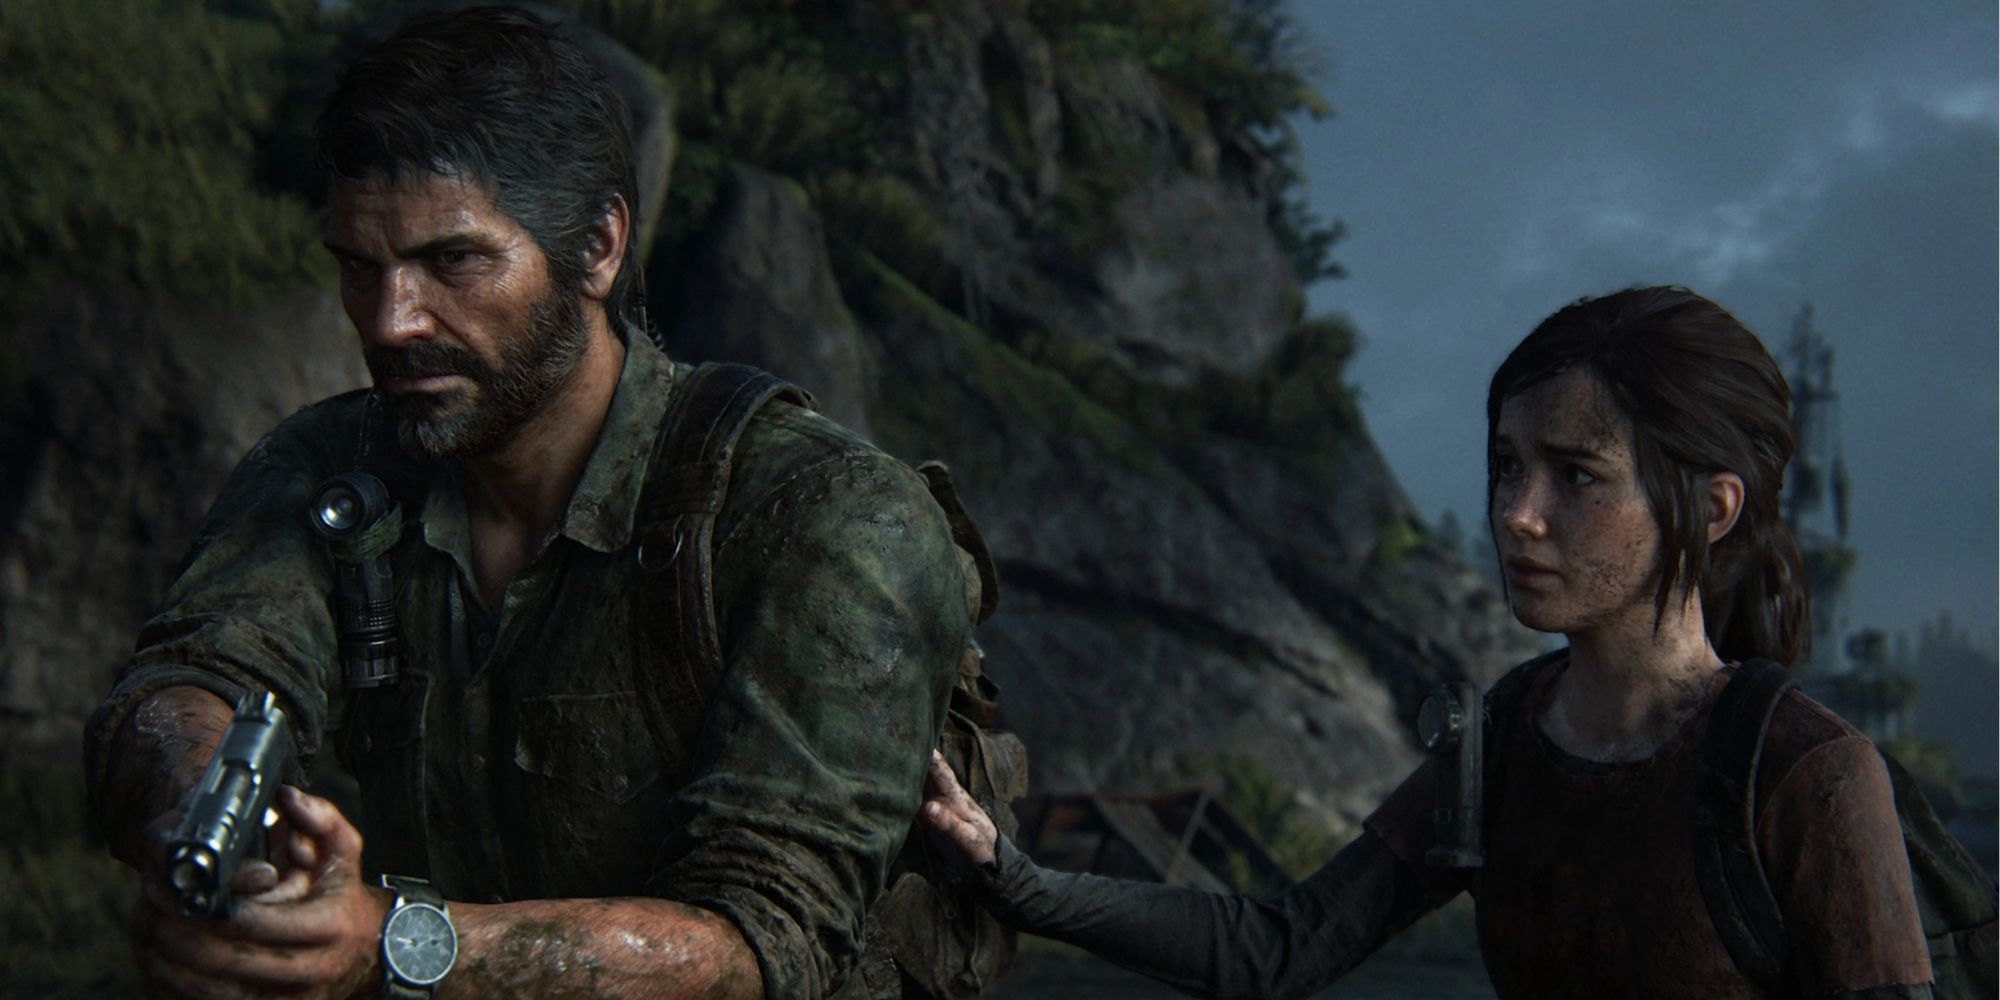 joel holding a gun with ellie holding his arm